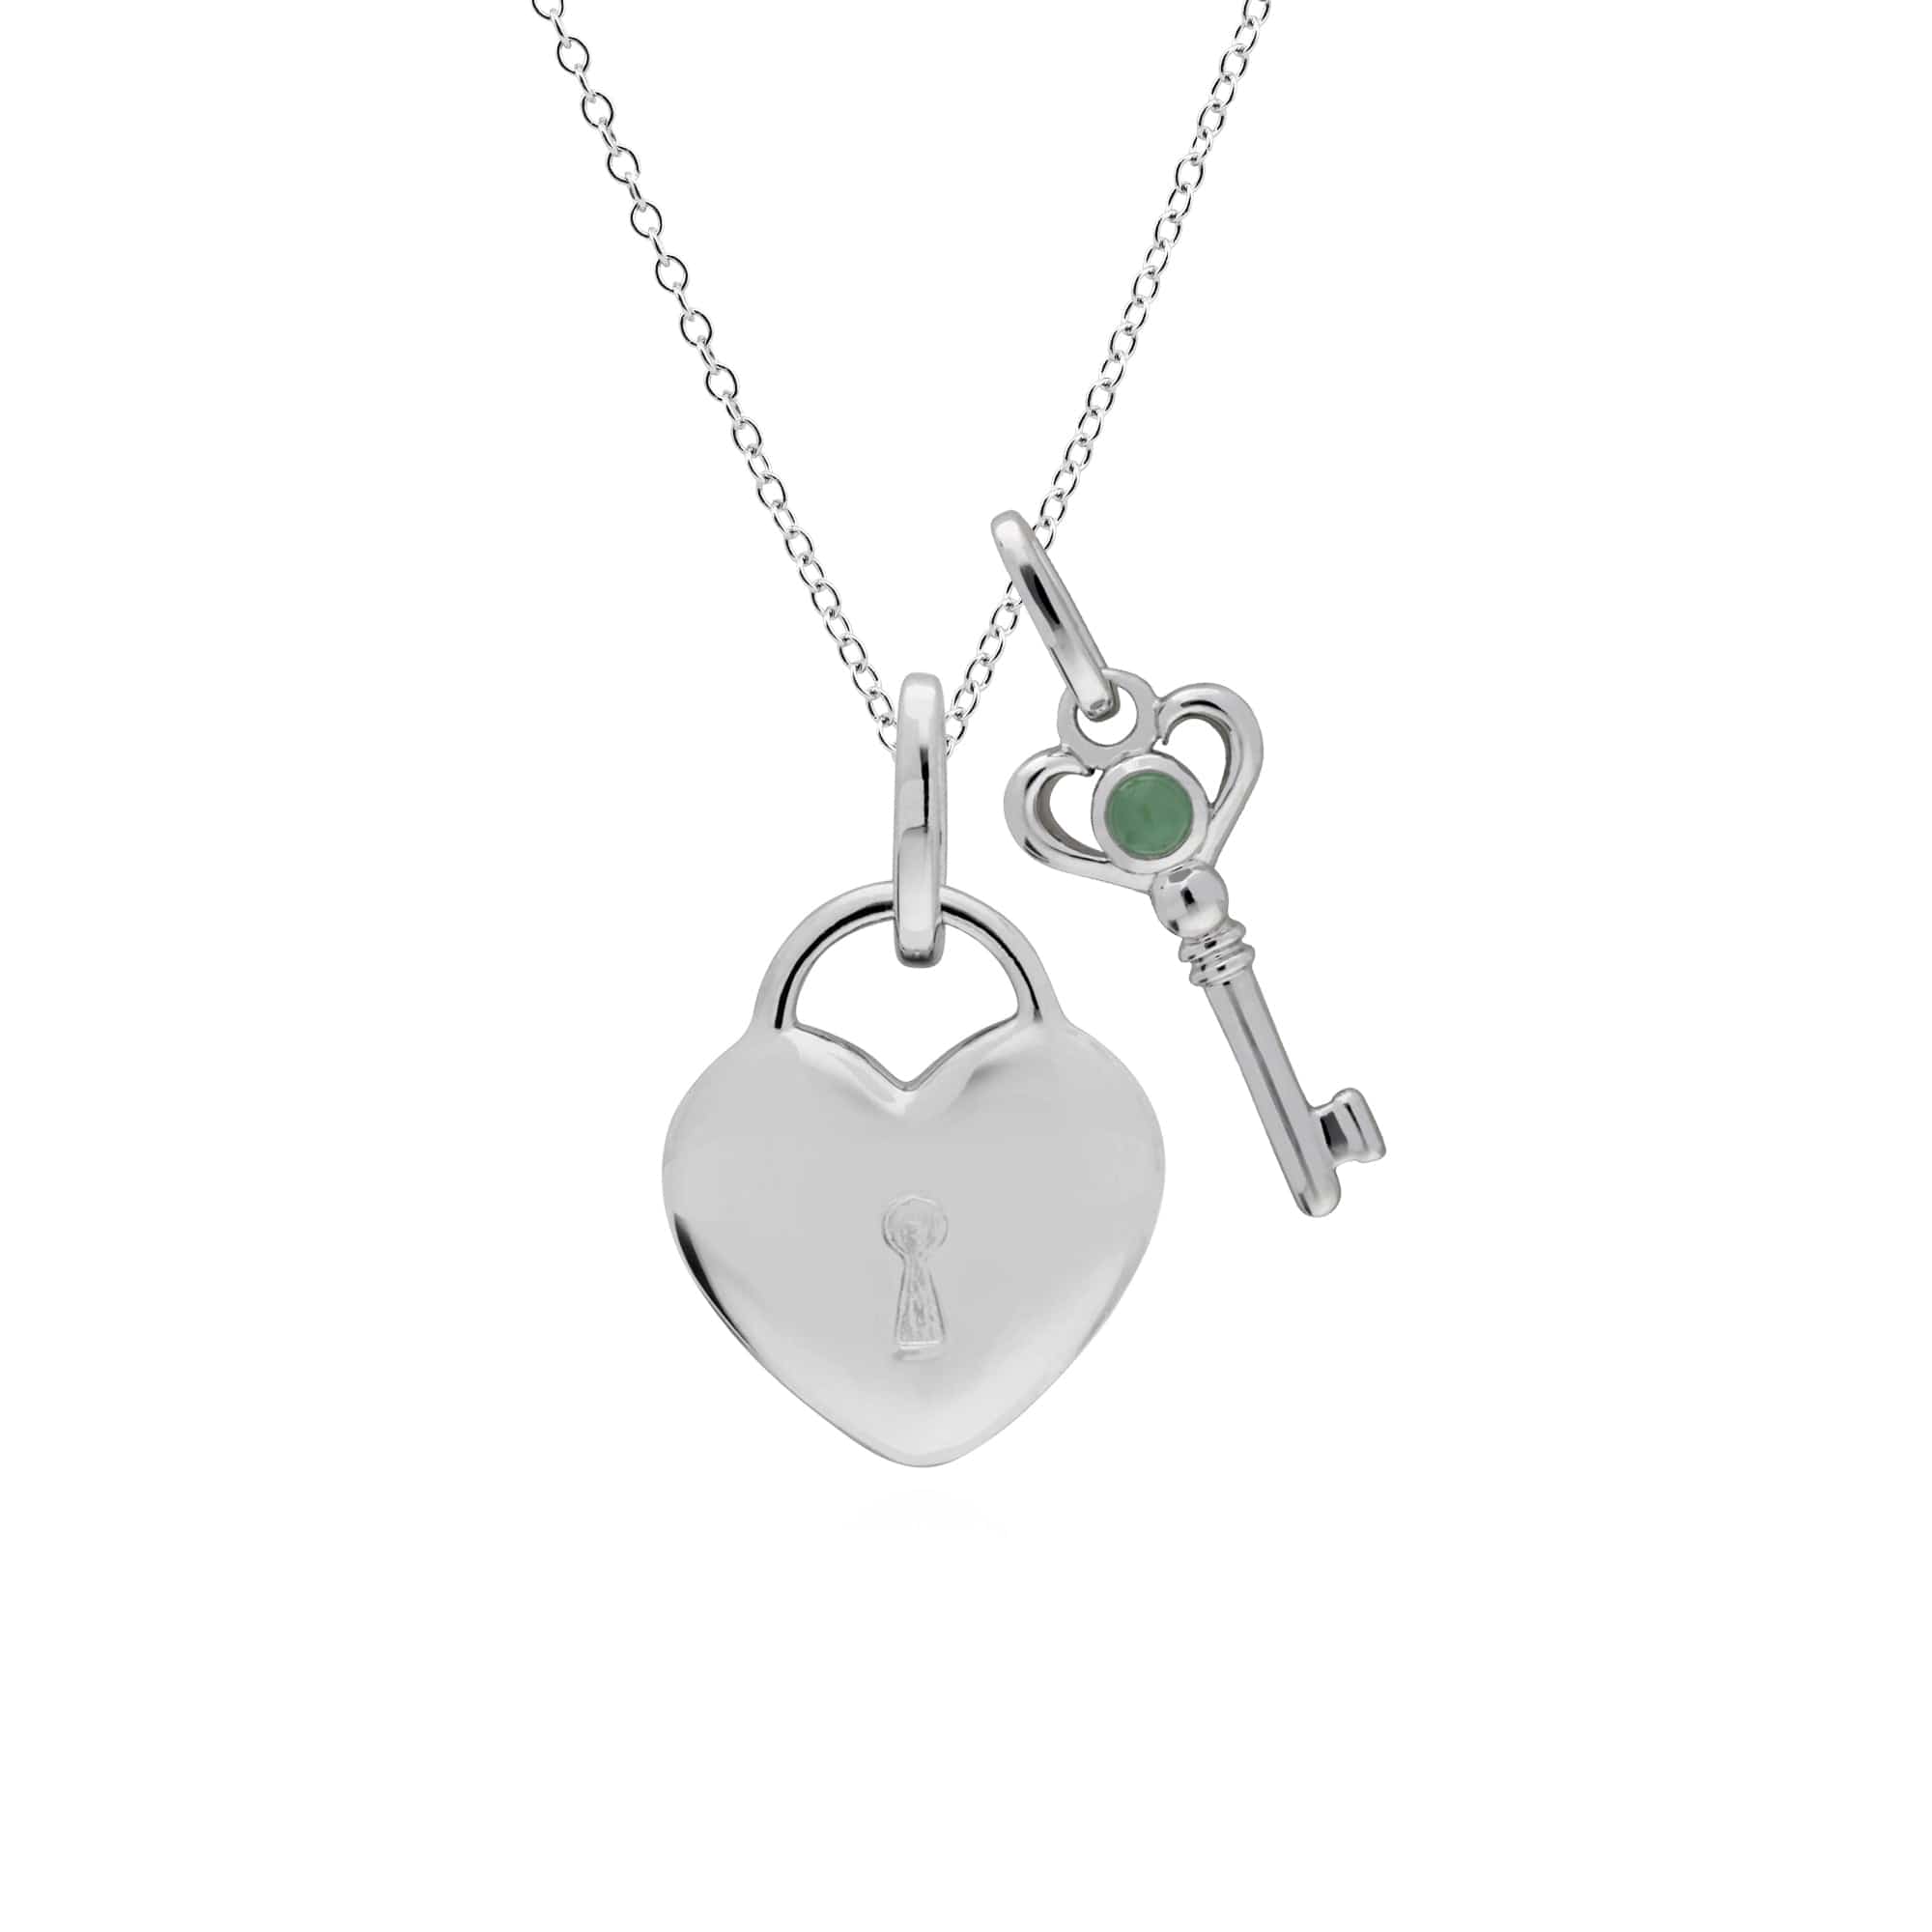 270P027501925-270P027001925 Classic Heart Lock Pendant & Jade Key Charm in 925 Sterling Silver 1